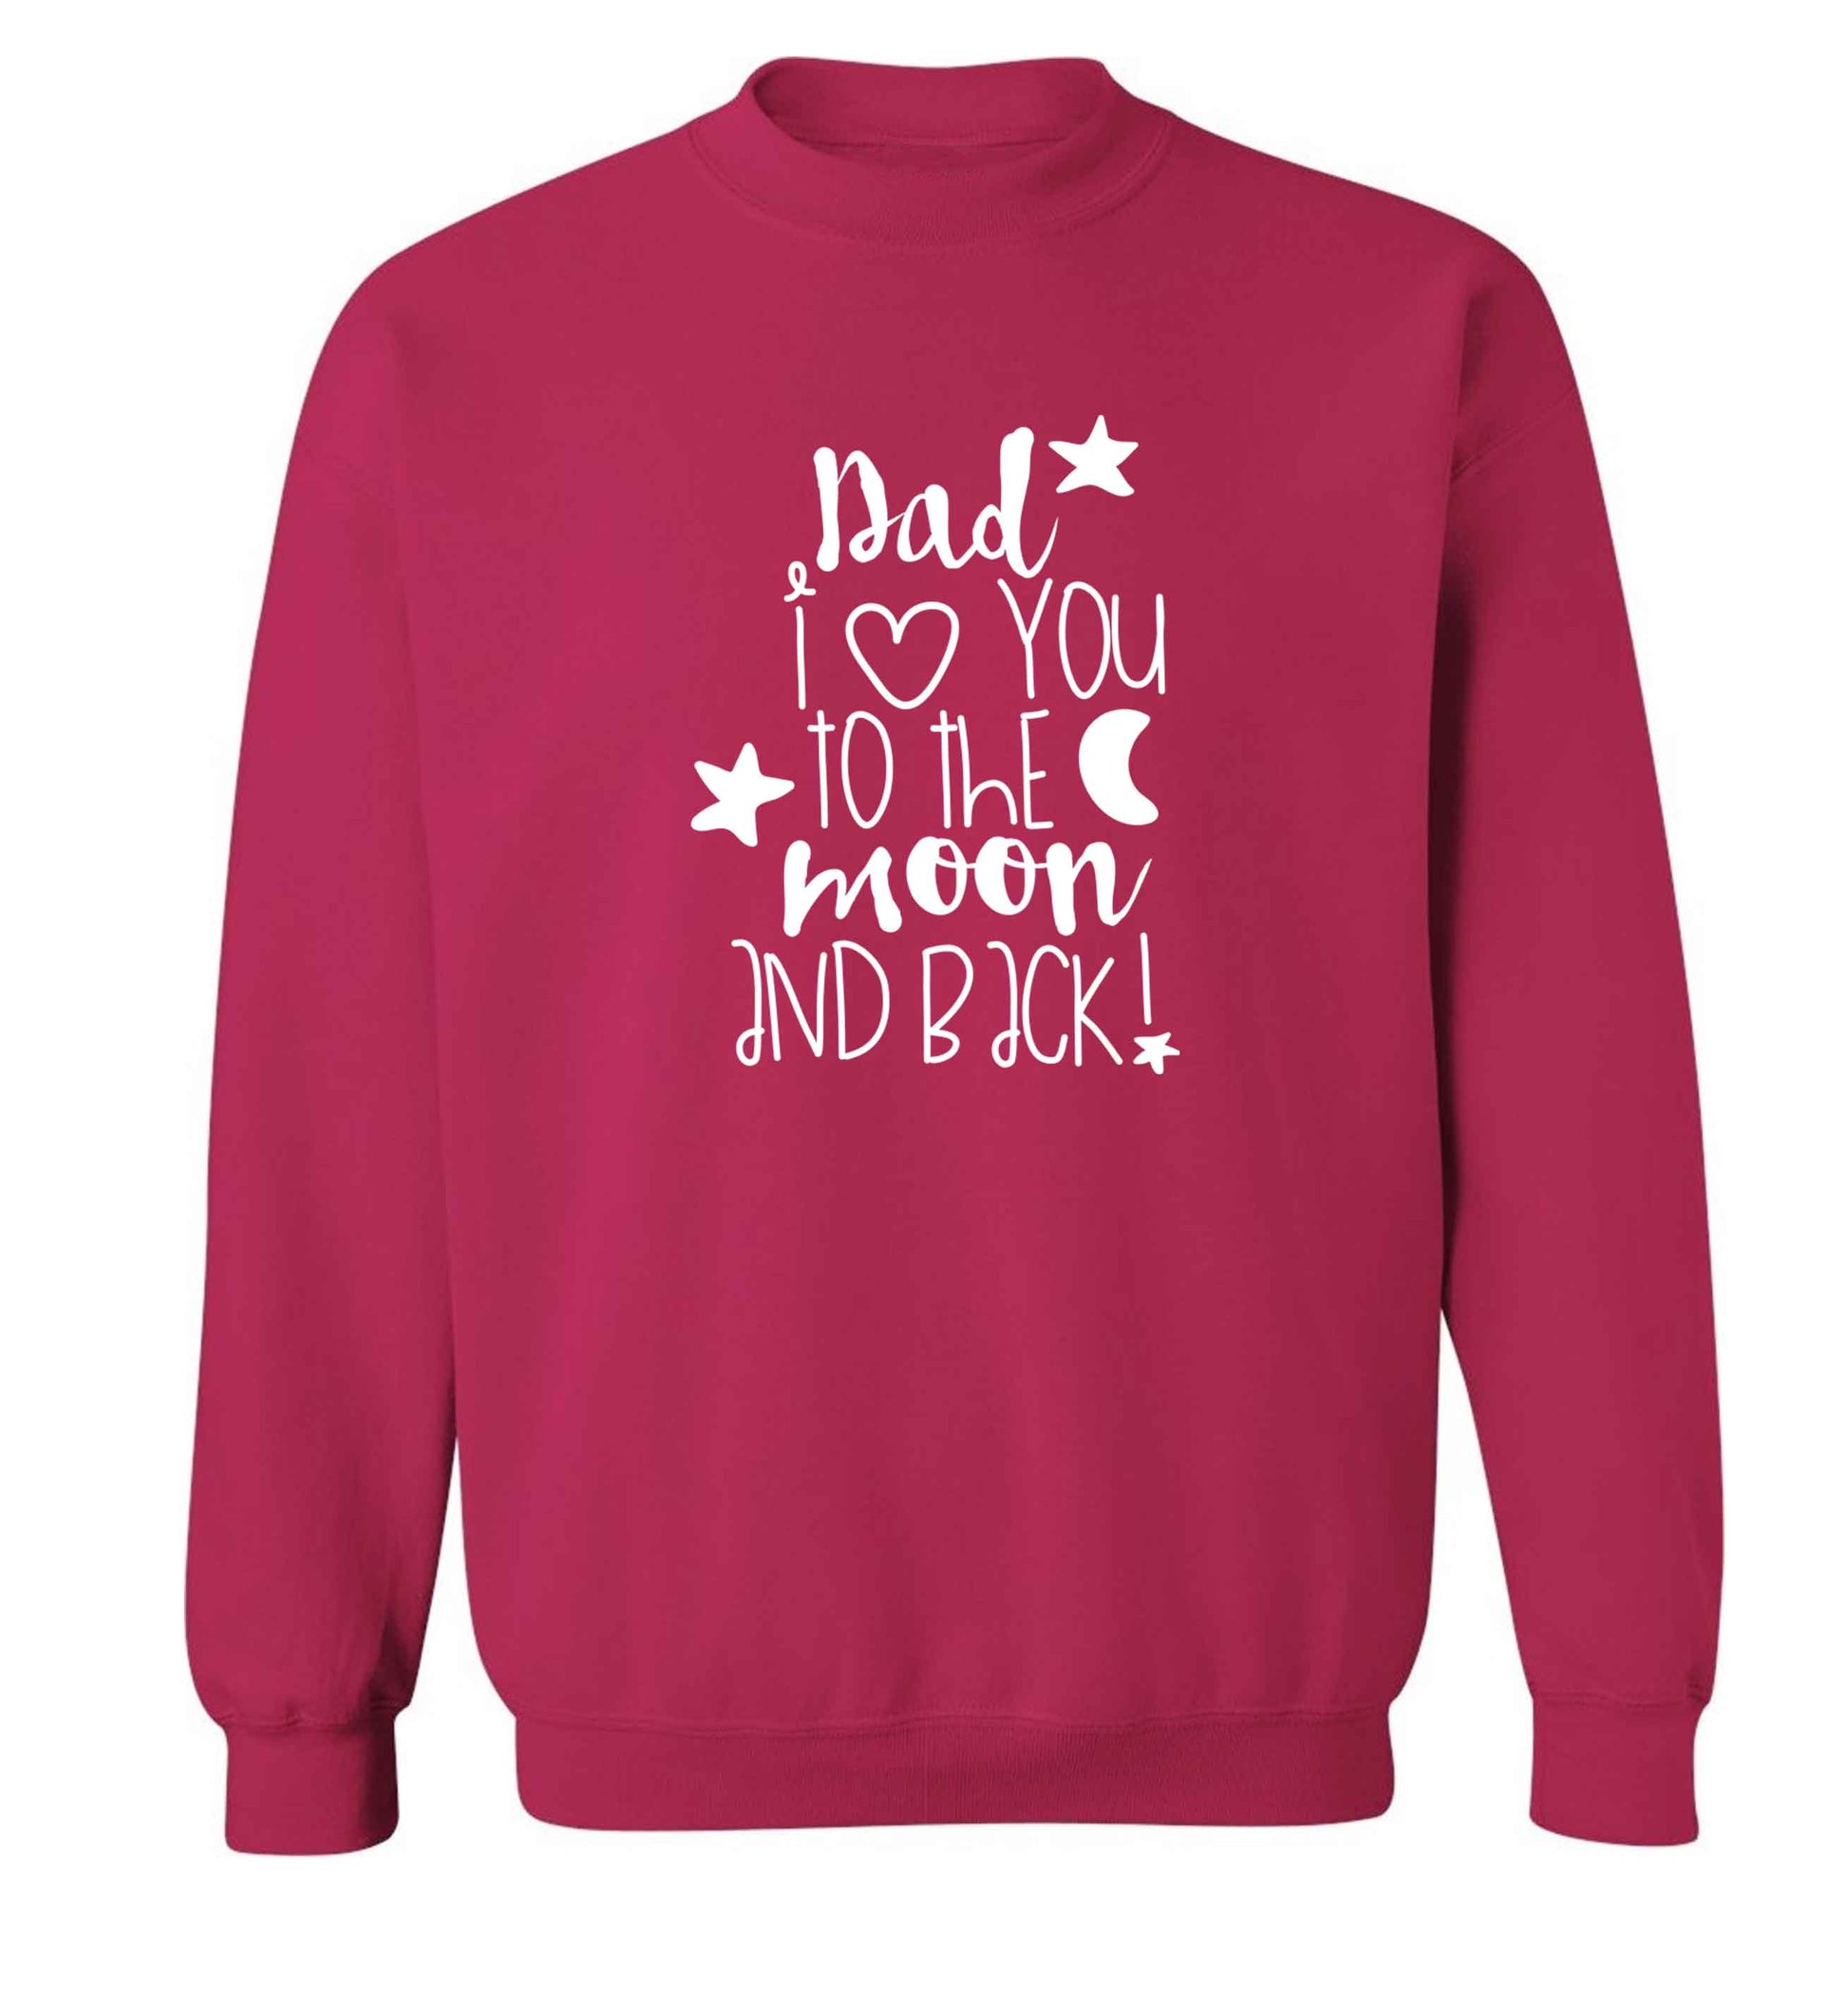 Dad I love you to the moon and back adult's unisex pink sweater 2XL